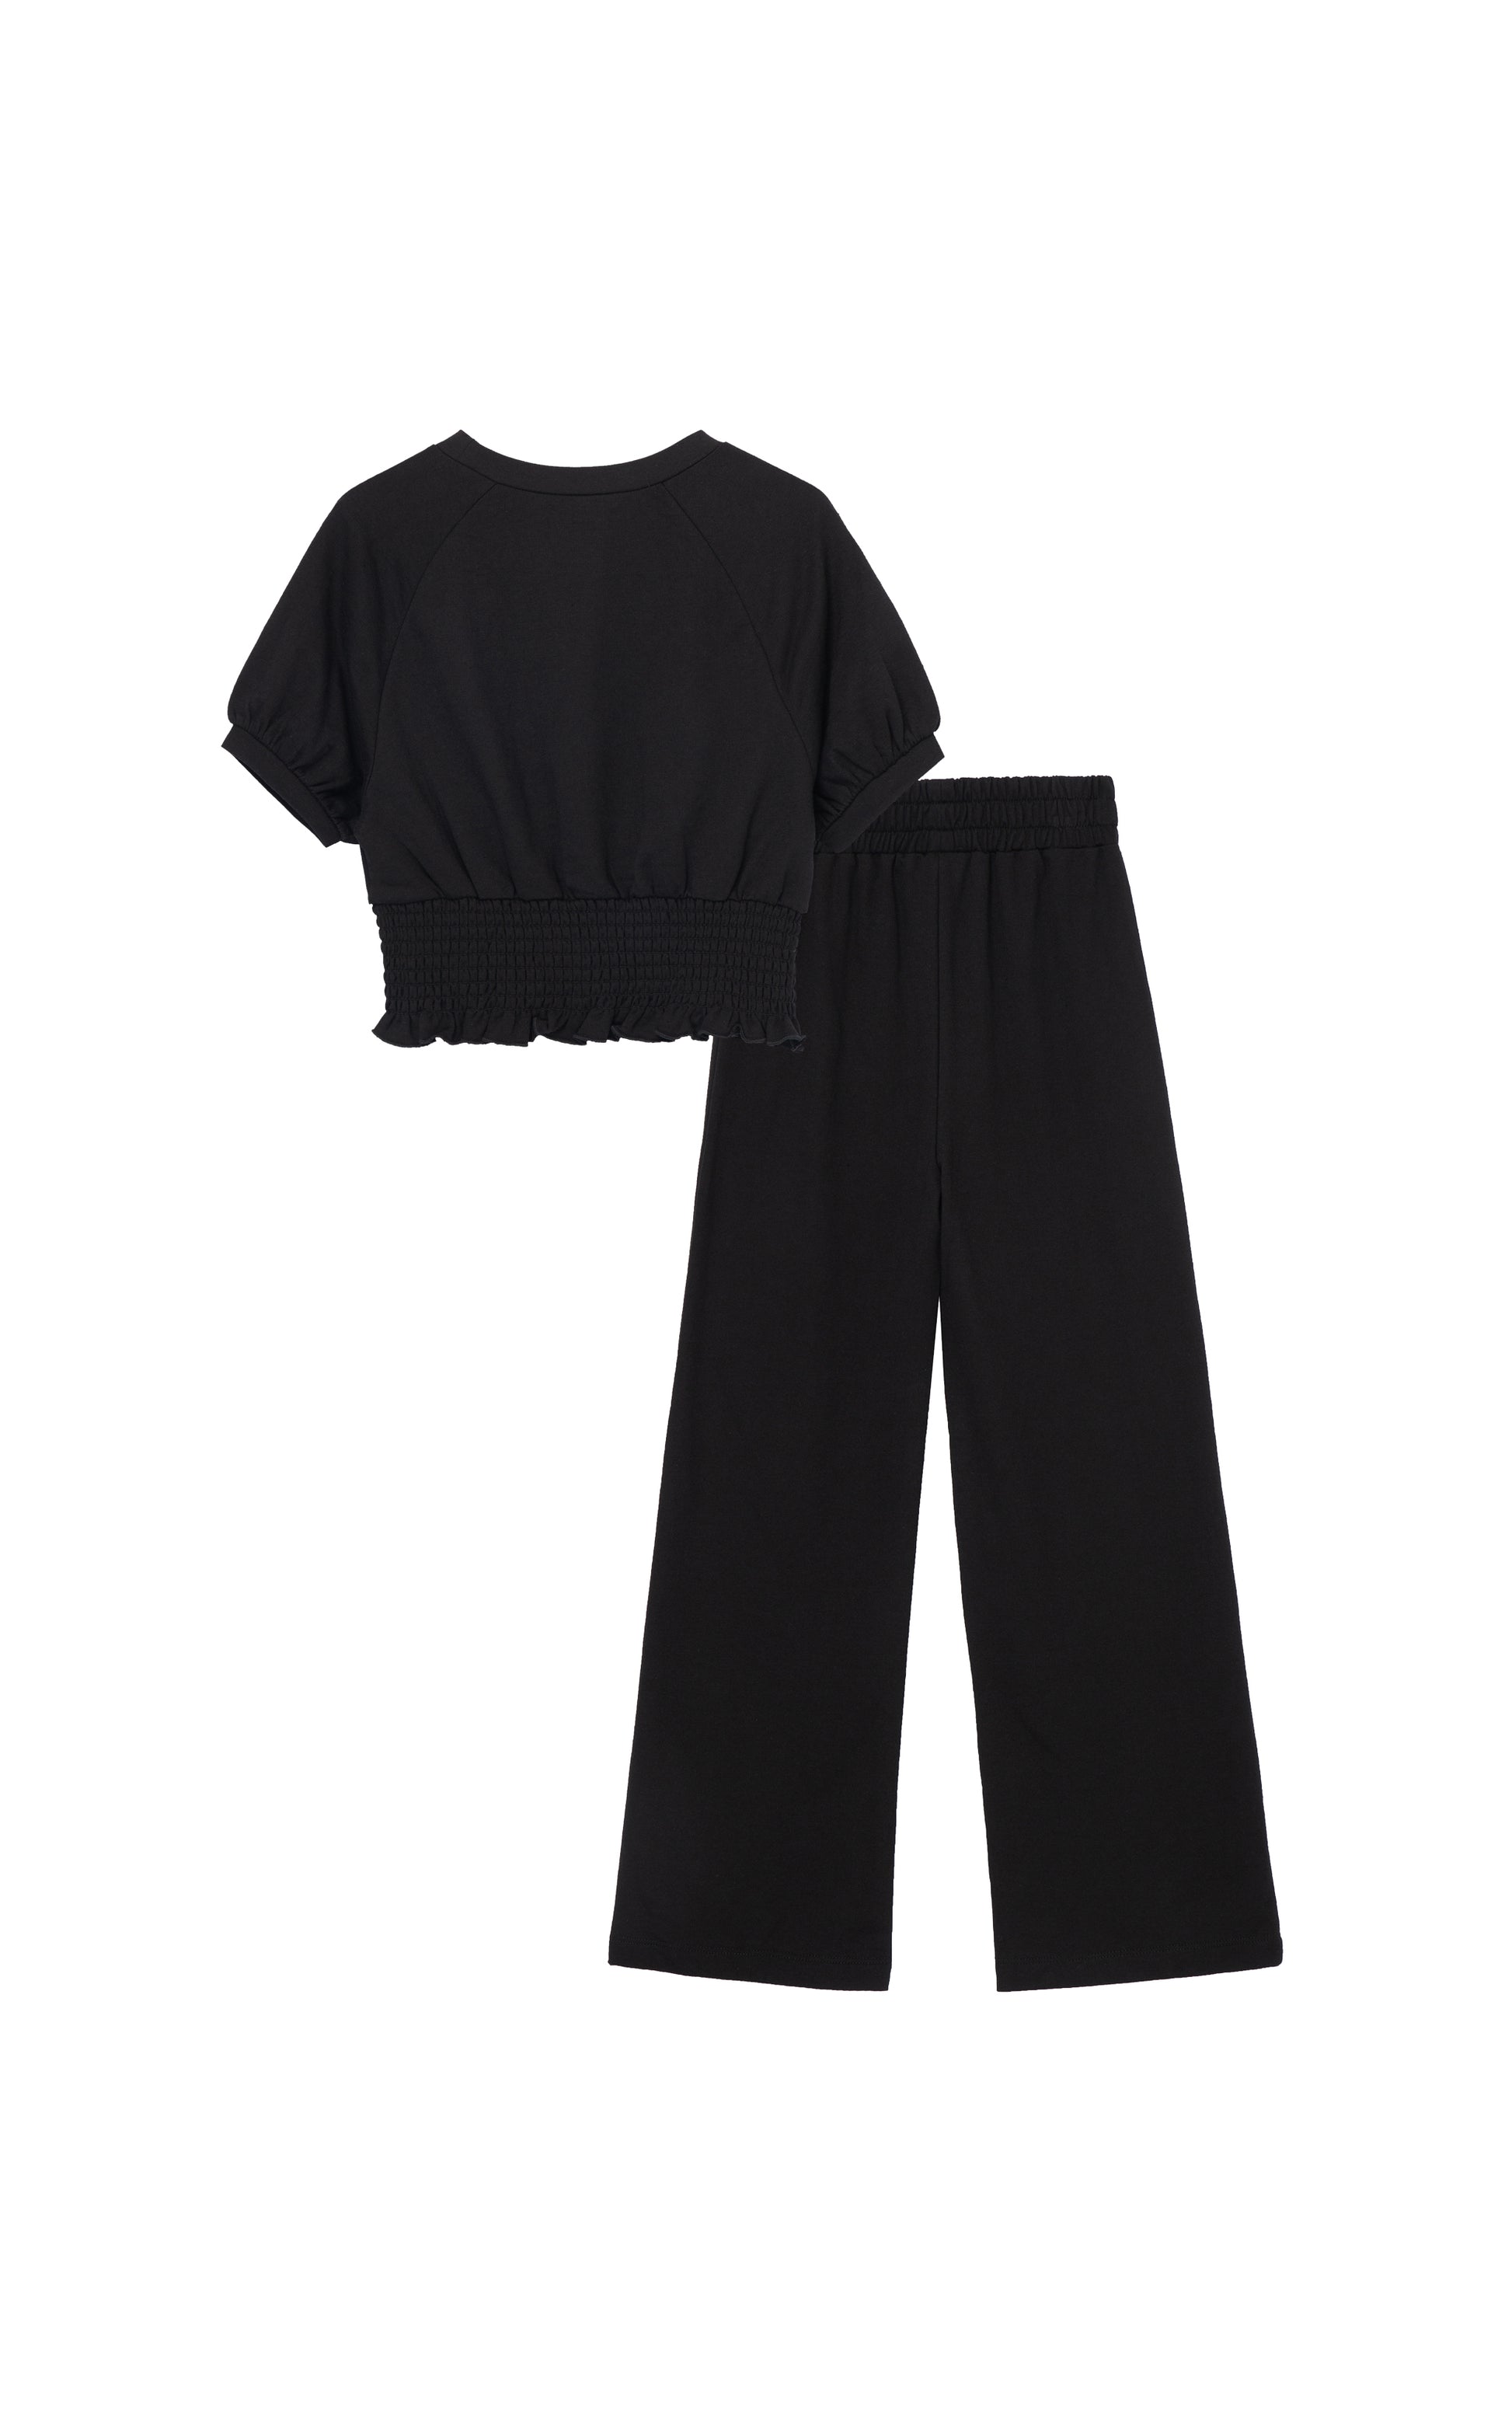 BACK OF BLACK SHORT-SLEEVE SWEATSHIRT WITH RUCHED WAIST AND MATCHING SWEATPANTS WITH RUCHED WAISTBAND AND FLARED BOTTOMS